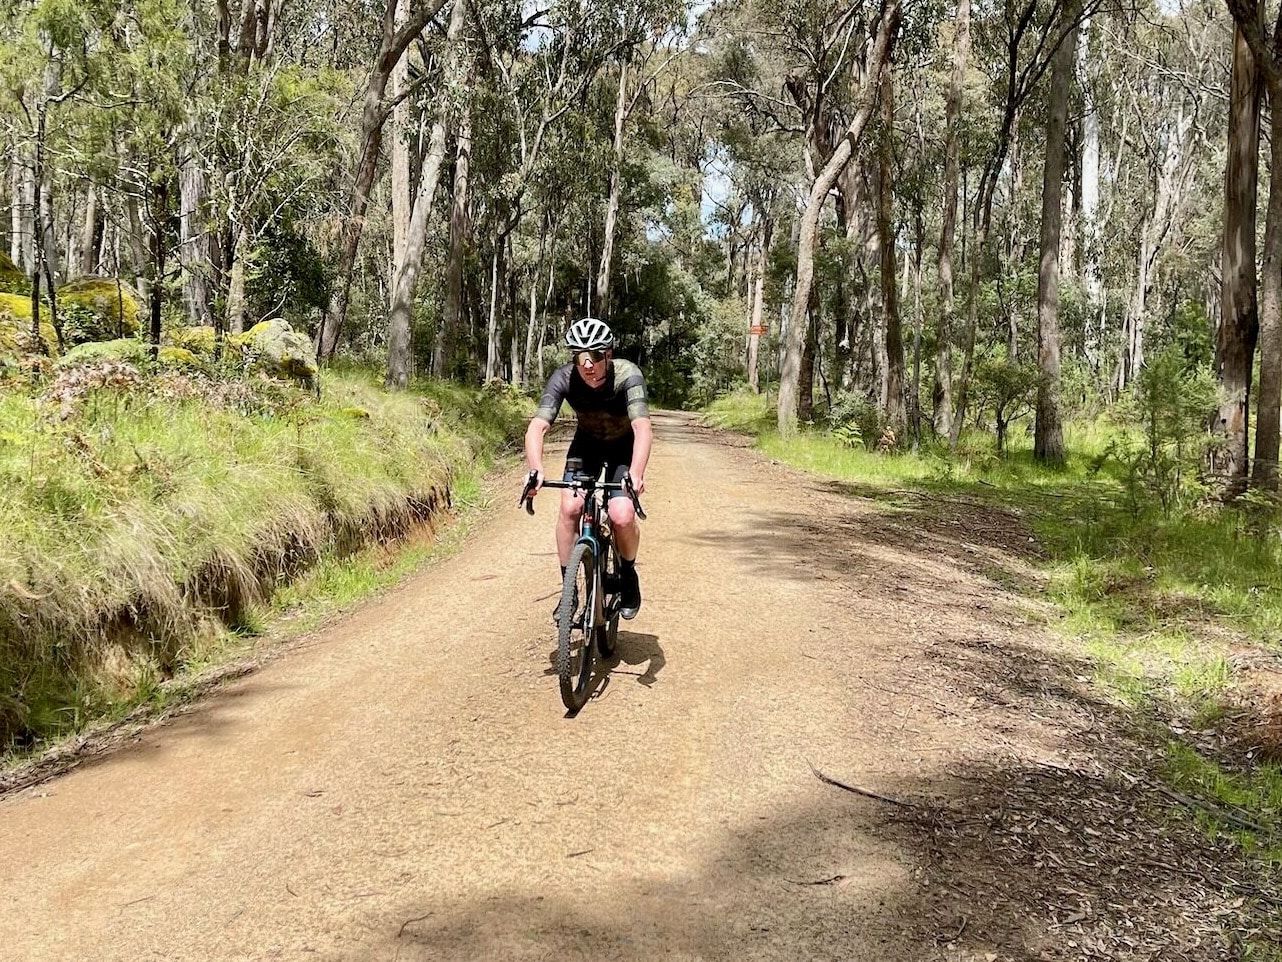 Cyclist riding on gravel road through native forest